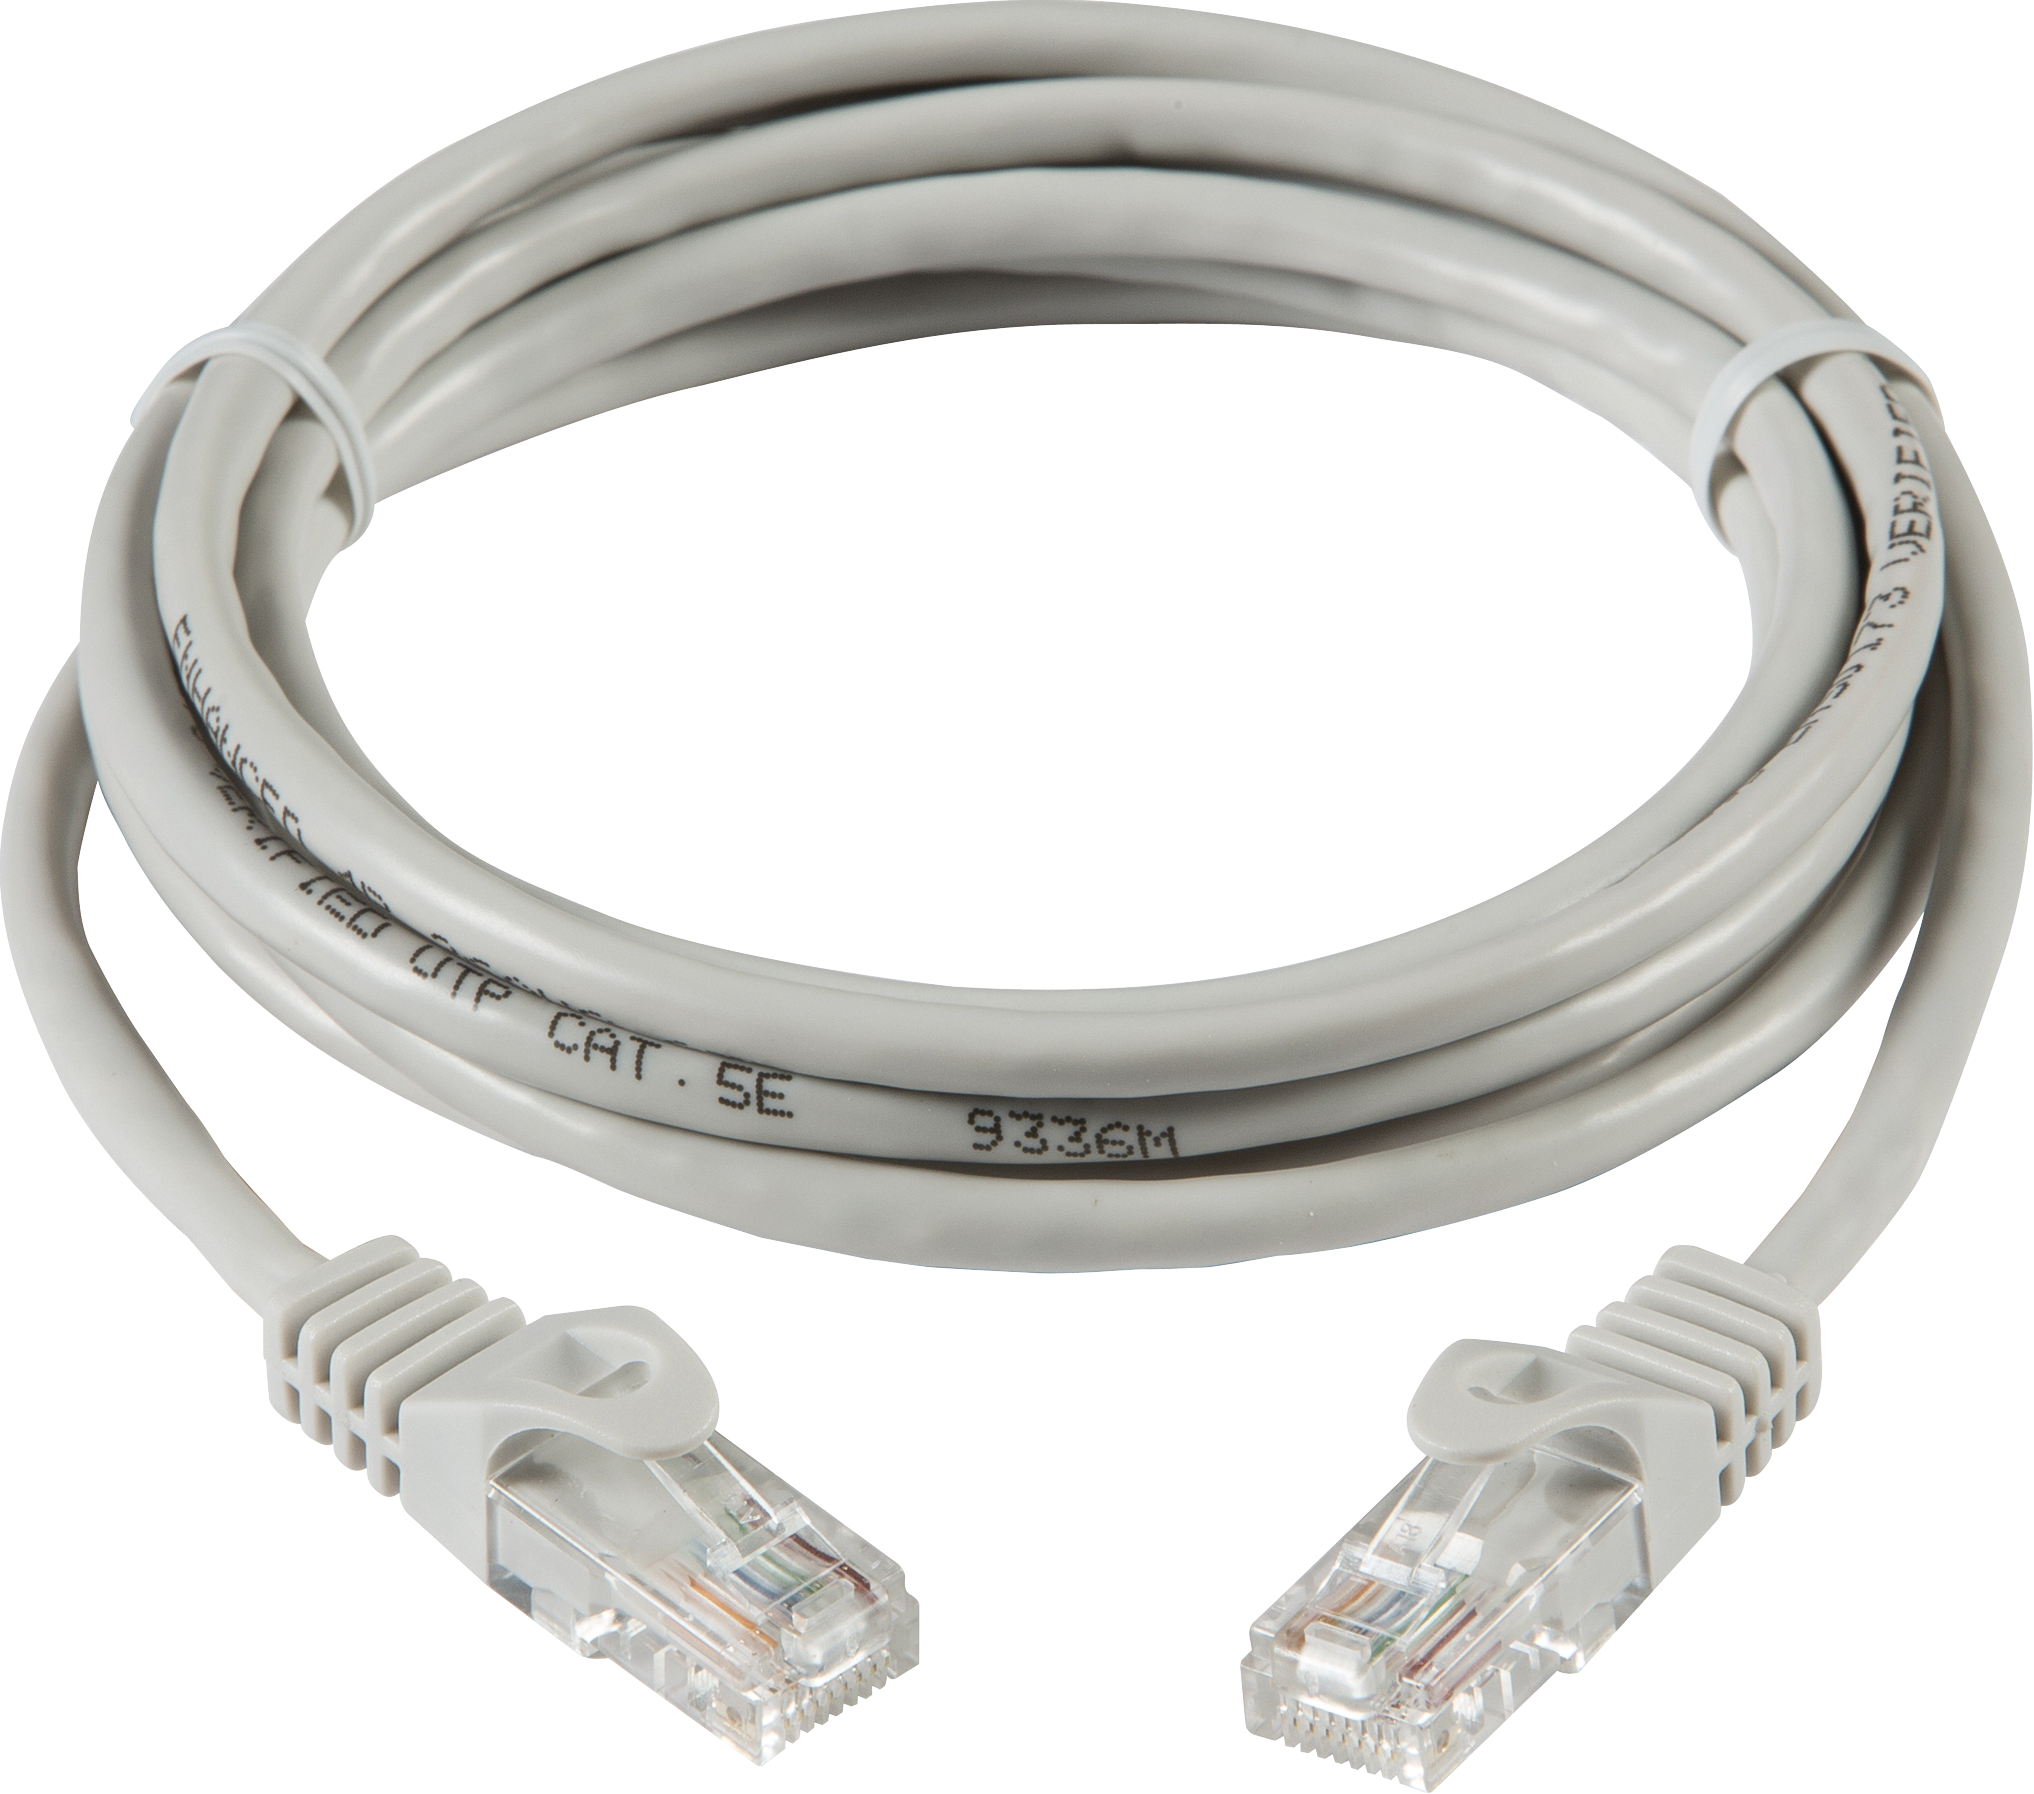 3m UTP CAT5e Networking Cable - Grey - NETC53M 